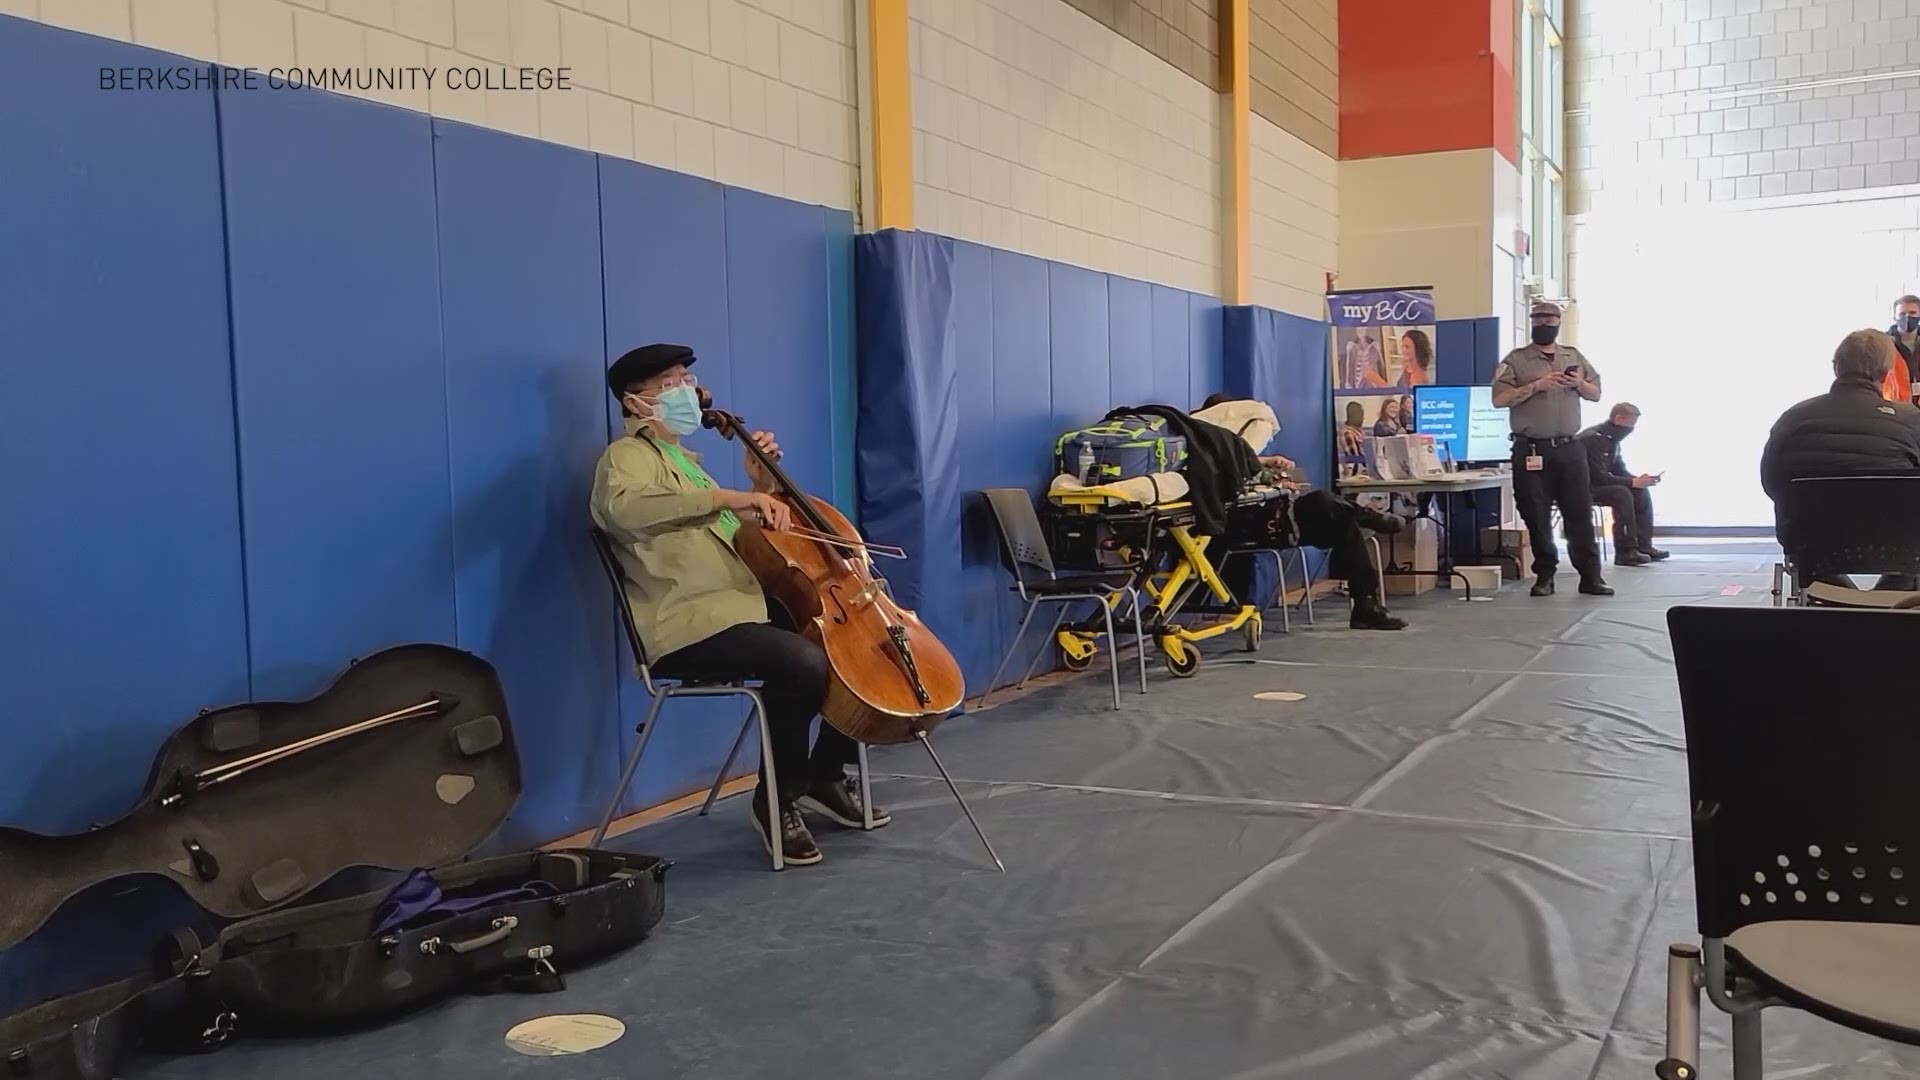 After receiving his second dose of a COVID-19 vaccine, Yo-Yo Ma transformed an observation area into a concert hall. (Courtesy: Berkshire Community College)